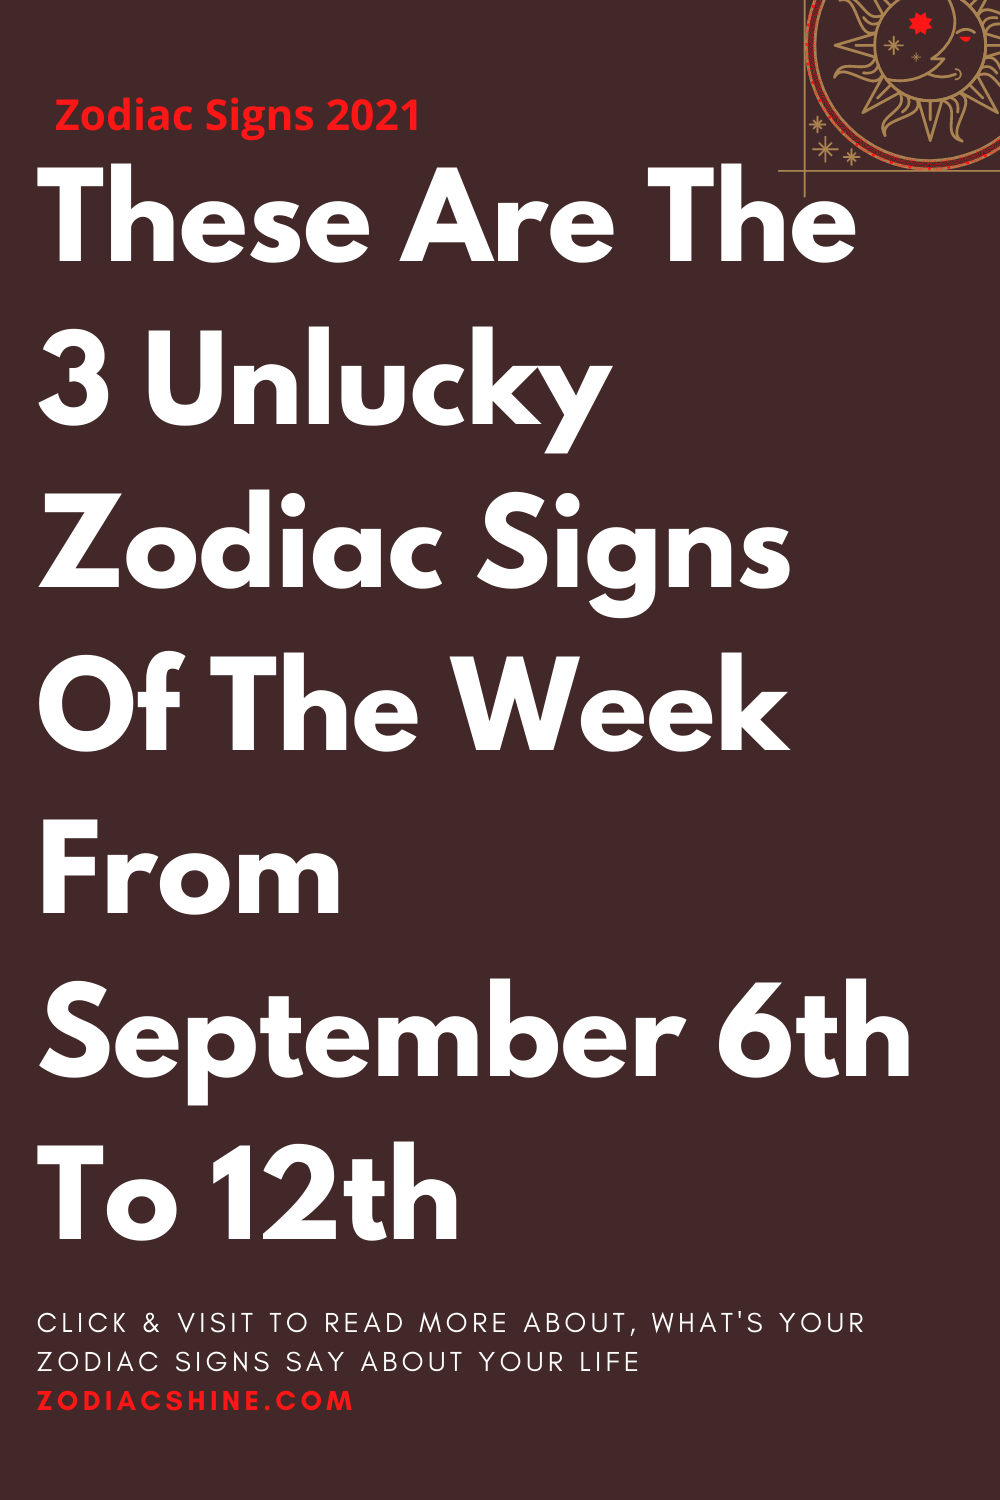 These Are The 3 Unlucky Zodiac Signs Of The Week From September 6th To 12th